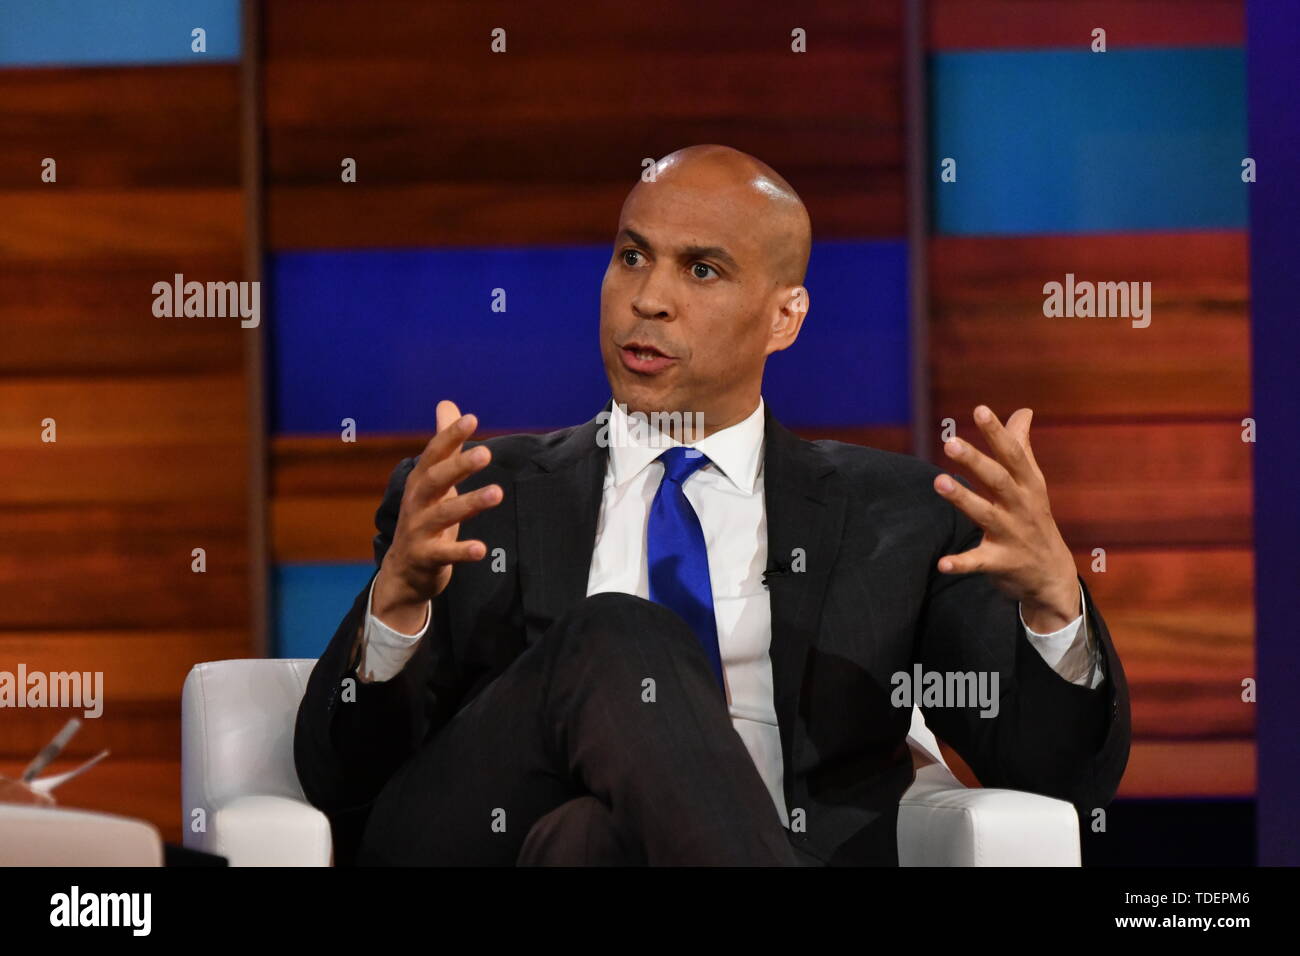 Charleston, USA. 15th June, 2019. Democratic presidential hopeful Senator Cory Booker during an interview with moderator Soledad O'Brien during the Black Economic Alliance Presidential Forum June 15, 2019 in Charleston, South Carolina. Credit: Planetpix/Alamy Live News Stock Photo